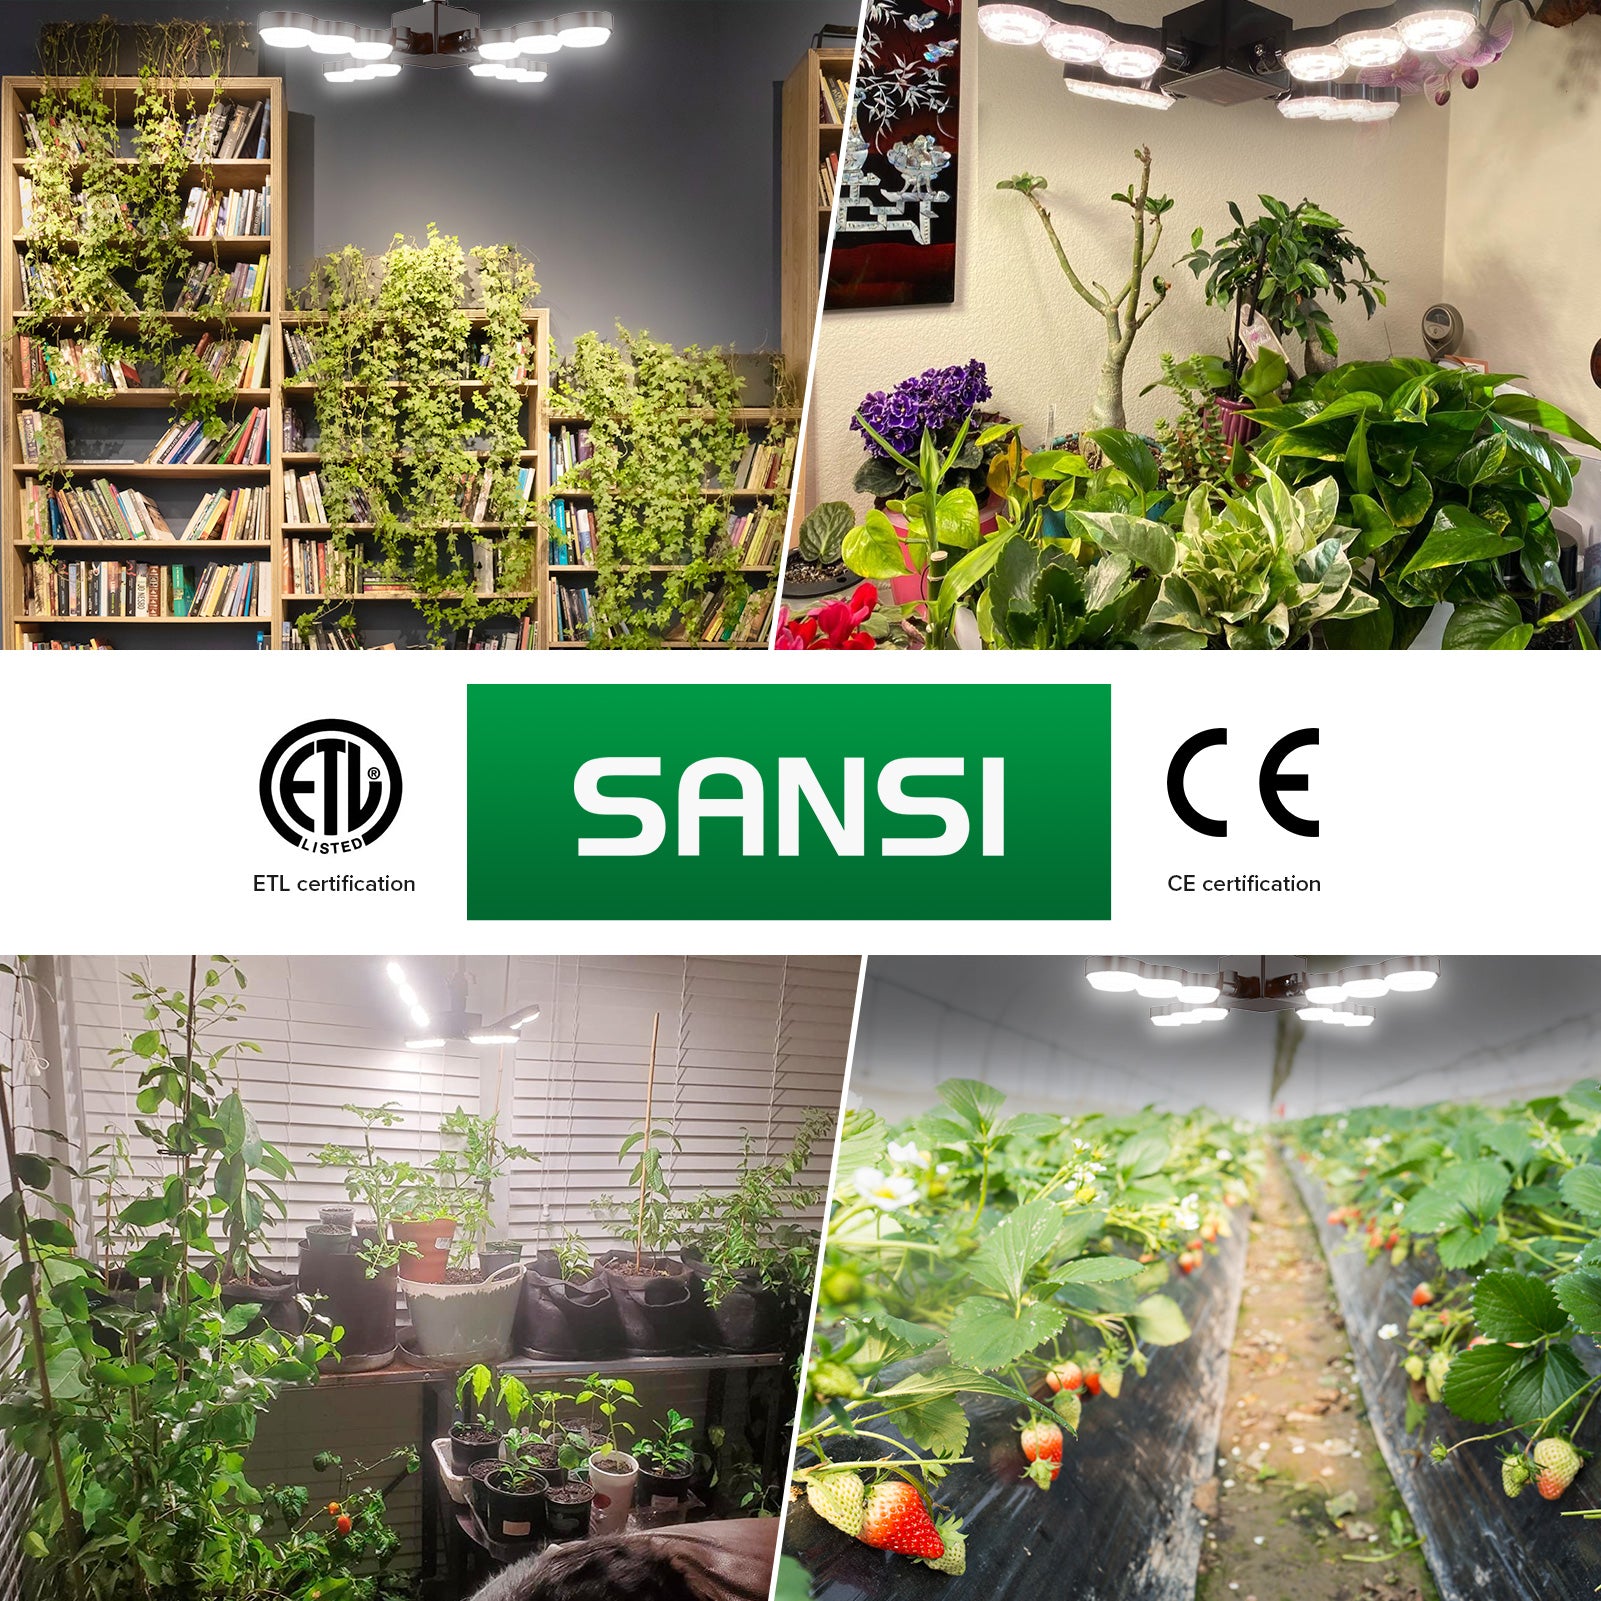 60W grow lamps for indoor plants with folding wings that has ETL certification and CE certification